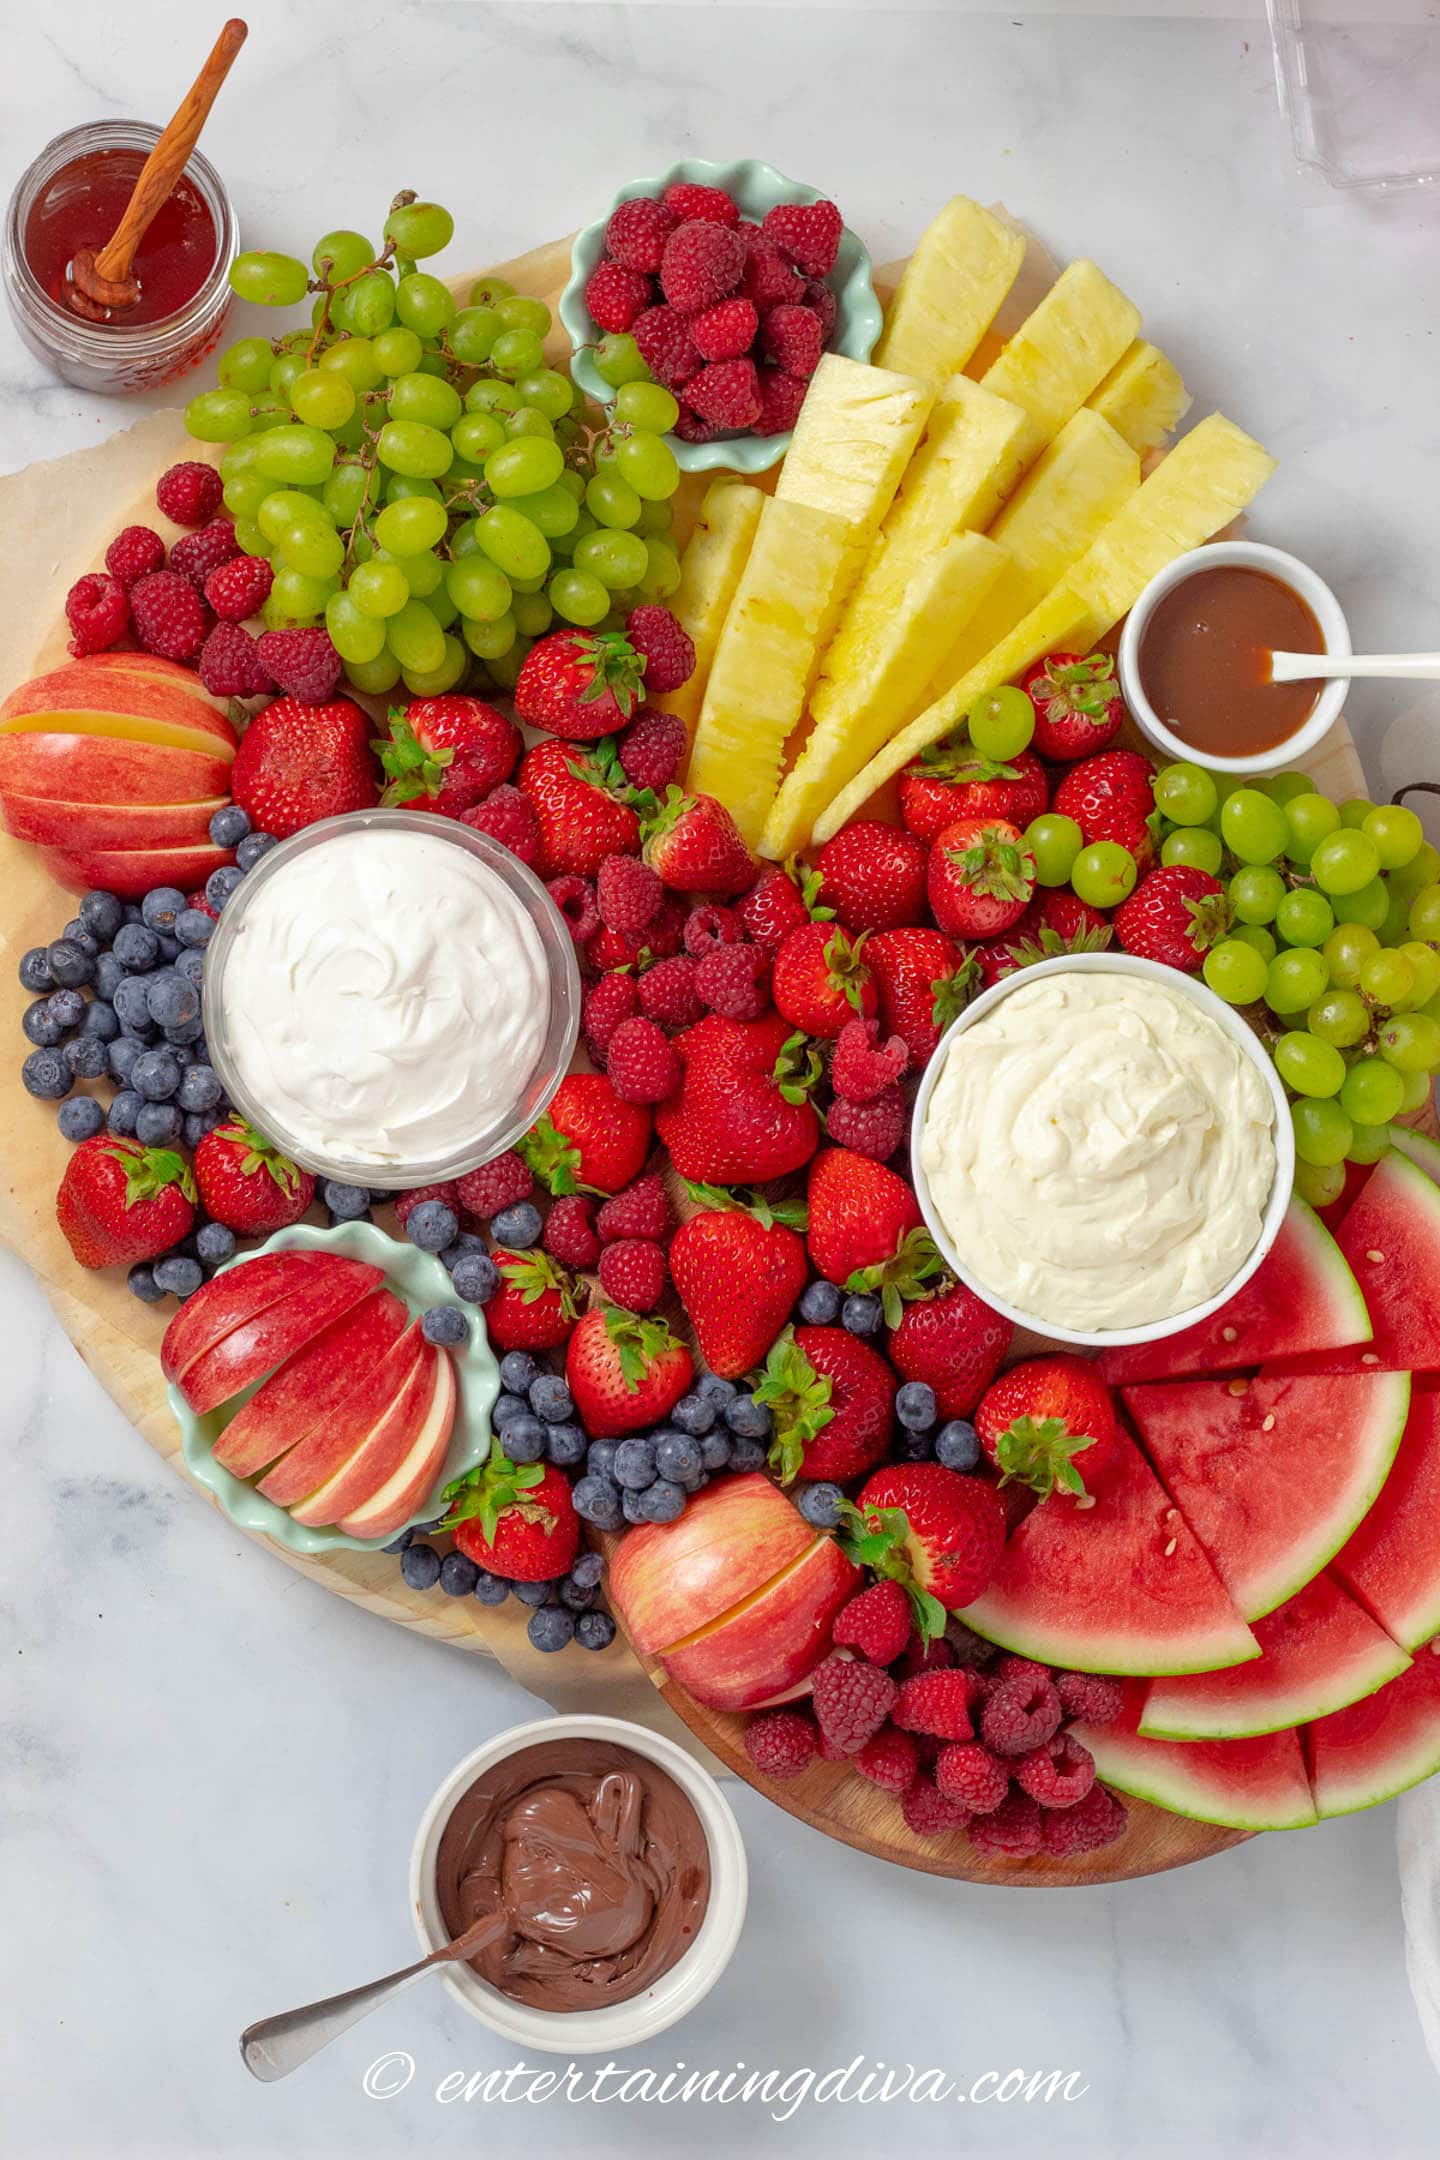 fruit charcuterie board with strawberries, raspberries, blueberries, apples, pineapple, watermelon, grapes and dips (whipped cream, cream cheese fruit dip, caramel, honey and hazel nut butter)